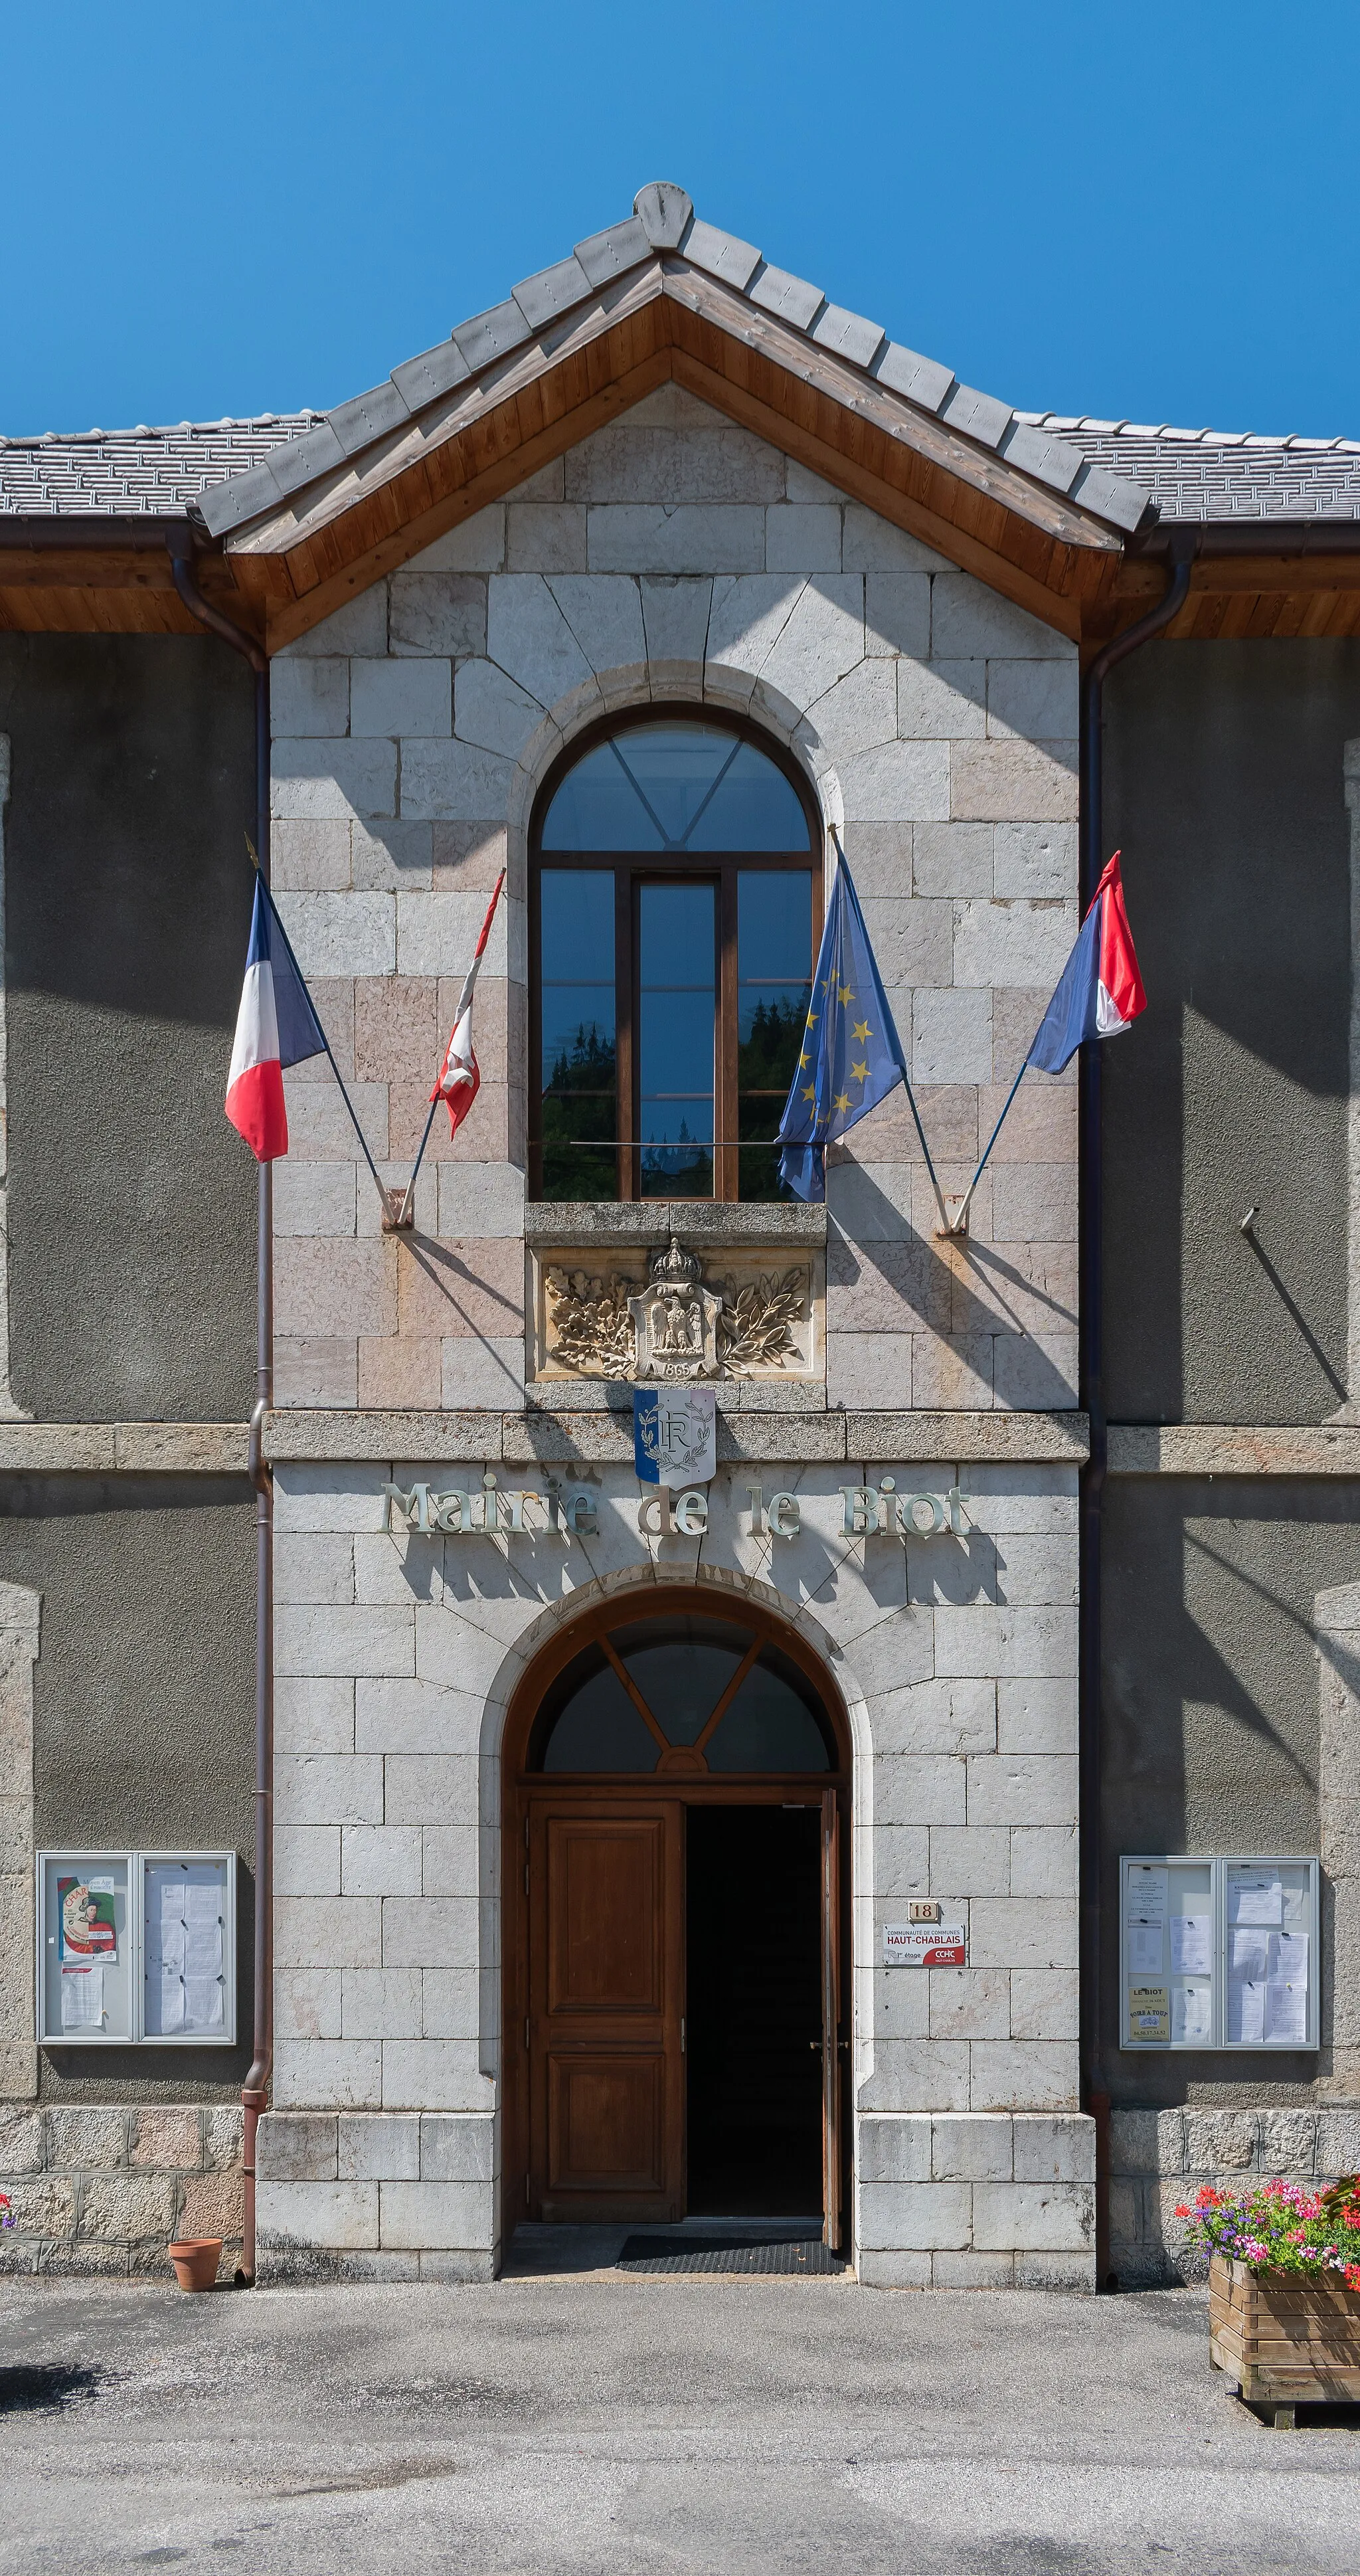 Photo showing: Town hall of Le Biot, Haute-Savoie, France